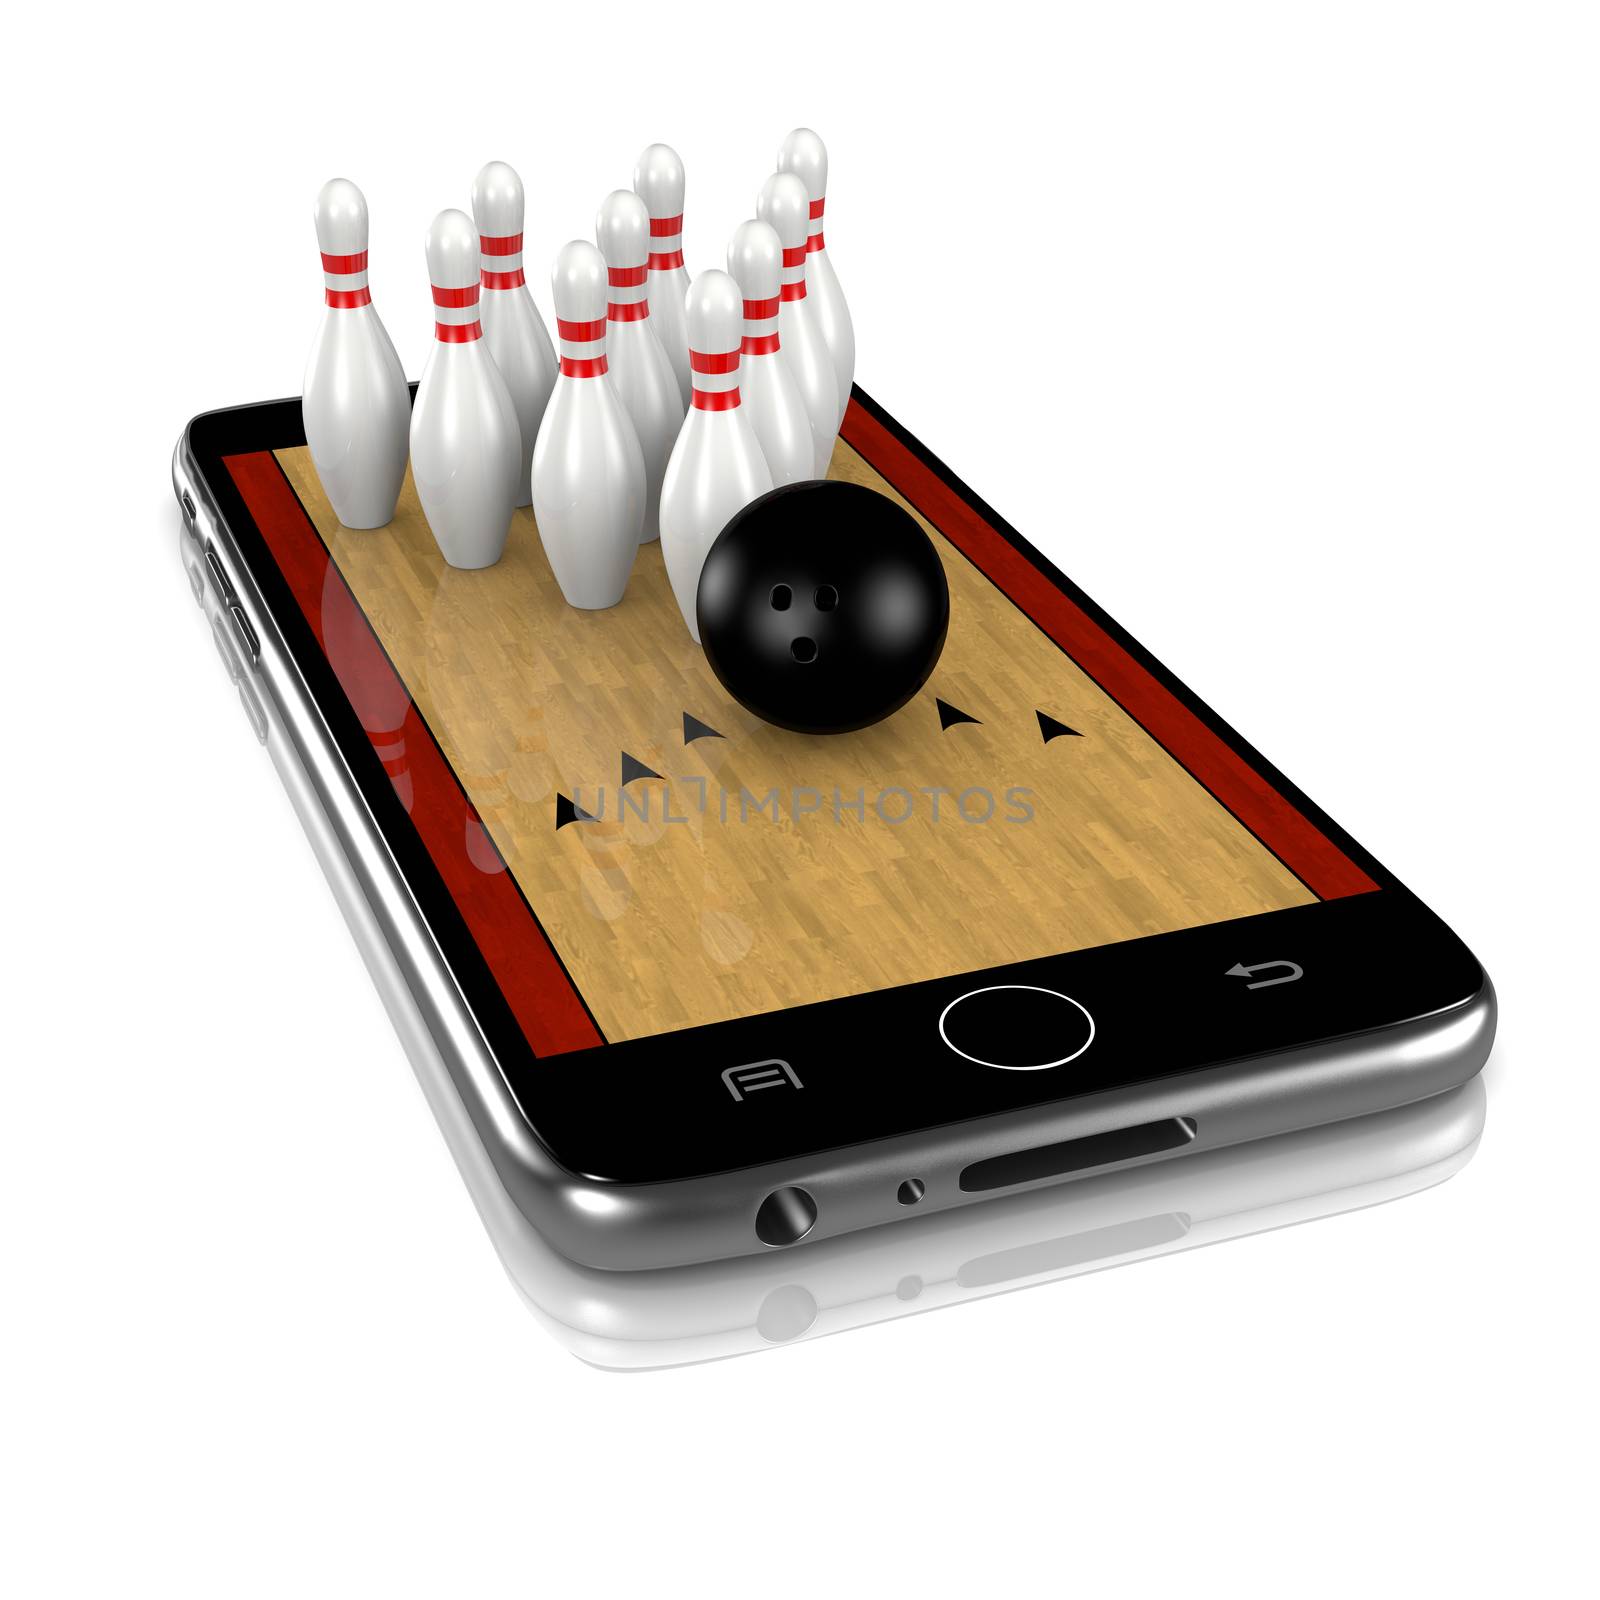 Bowling Field with Skittles and Ball on Smartphone Display 3D Illustration Isolated on White Background